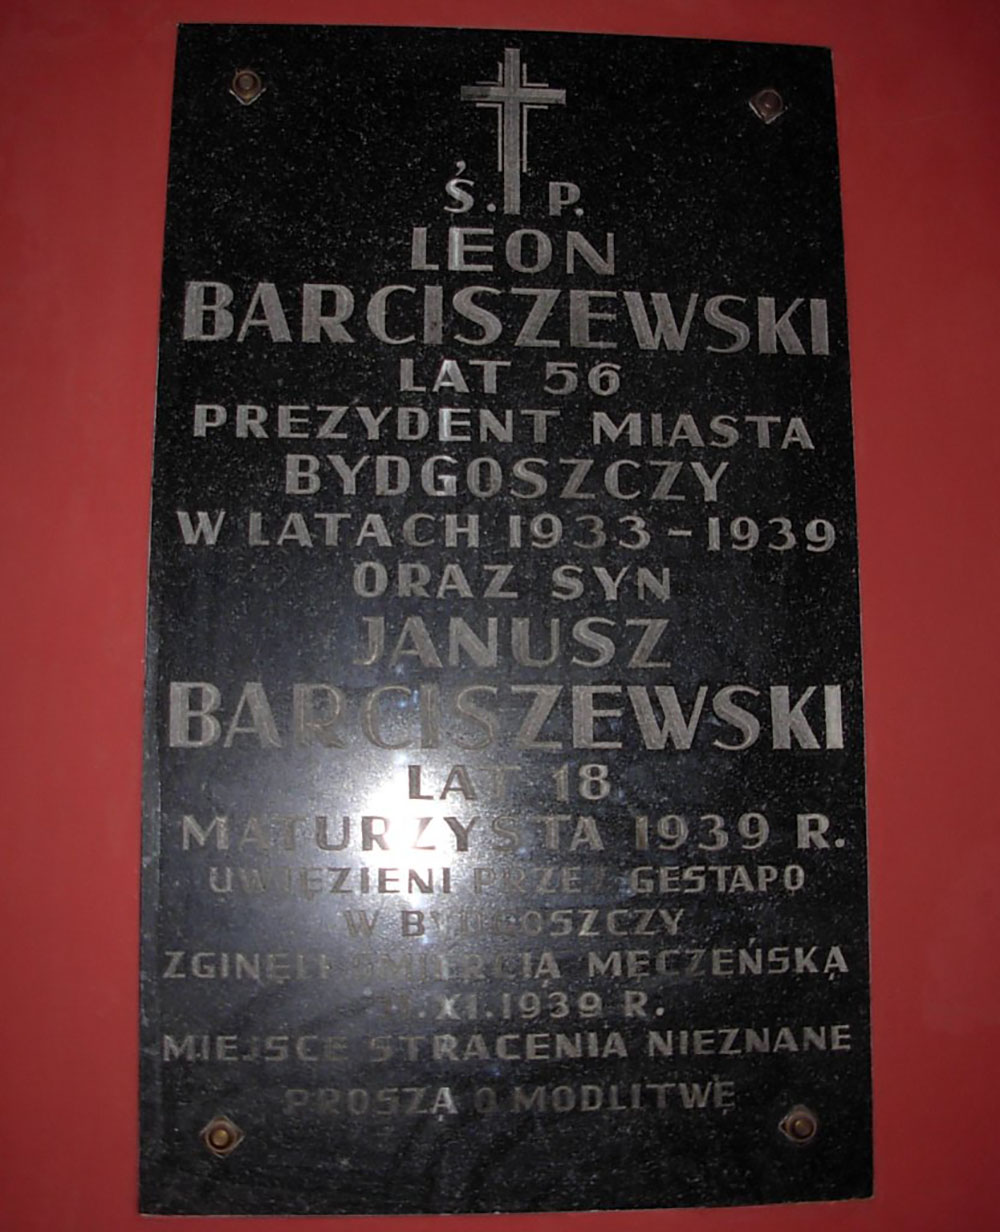 Plaques Bydgoszcz Cathedral #3